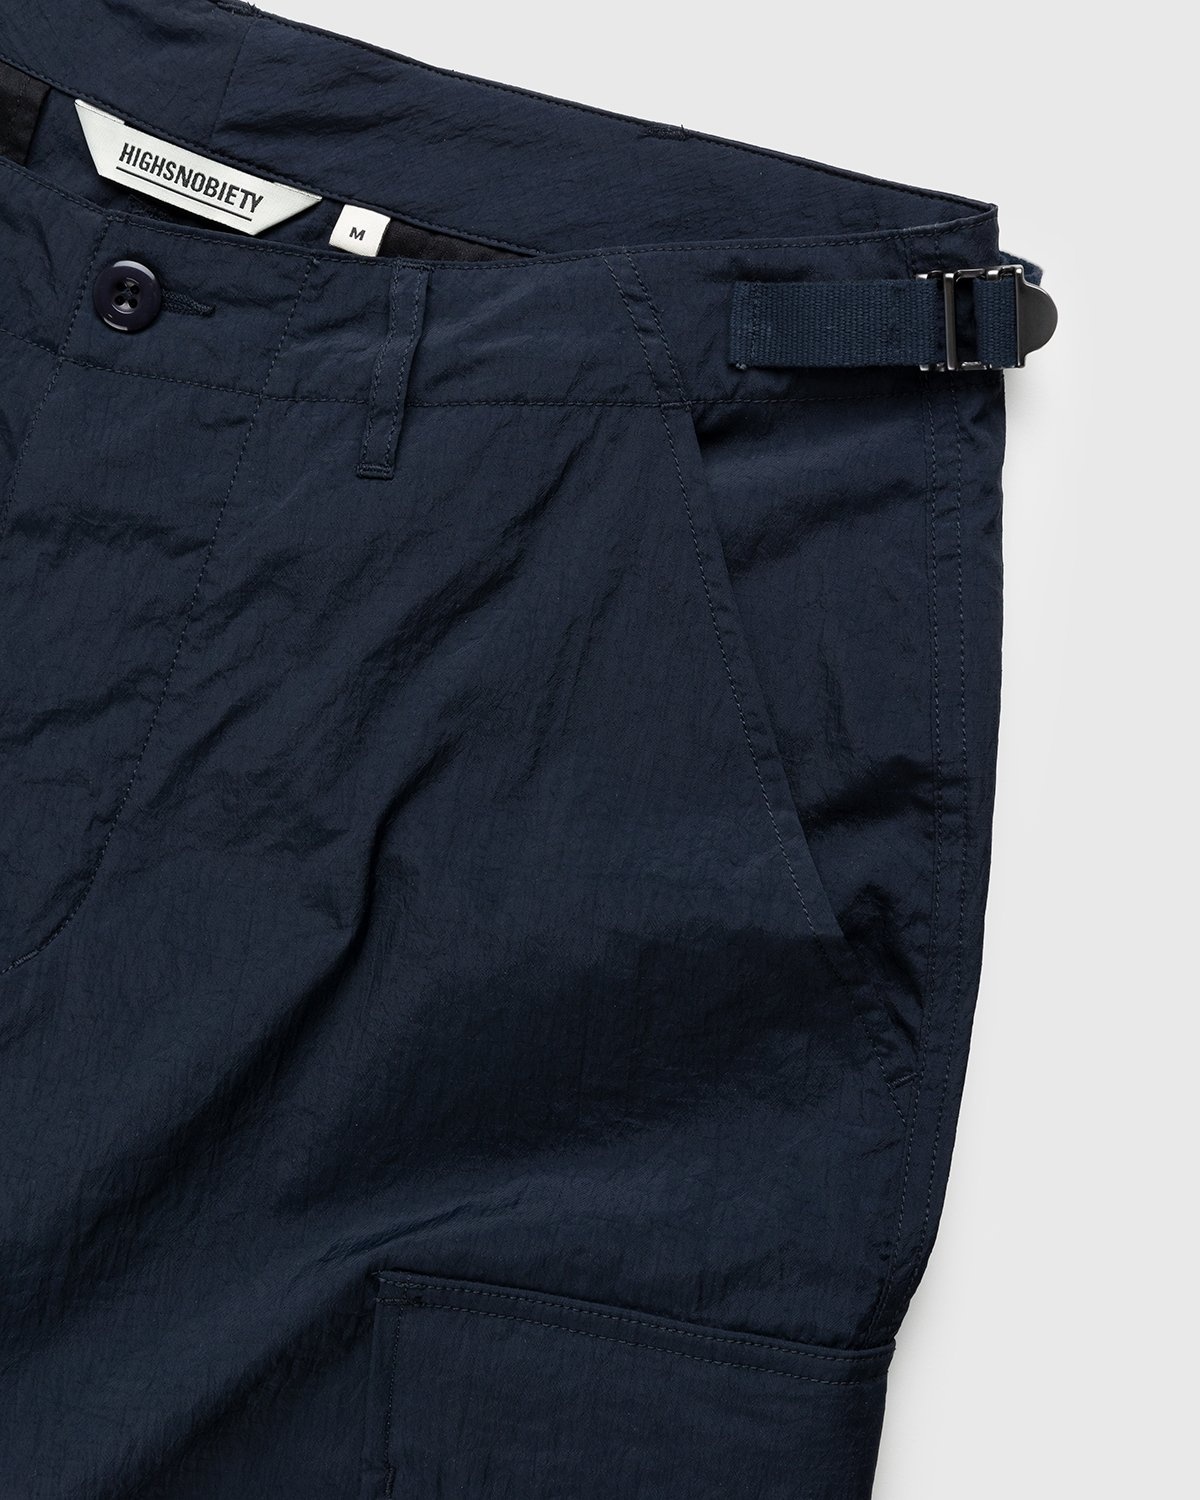 Highsnobiety – Water-Resistant Ripstop Cargo Pants Blue - Pants - Blue - Image 4